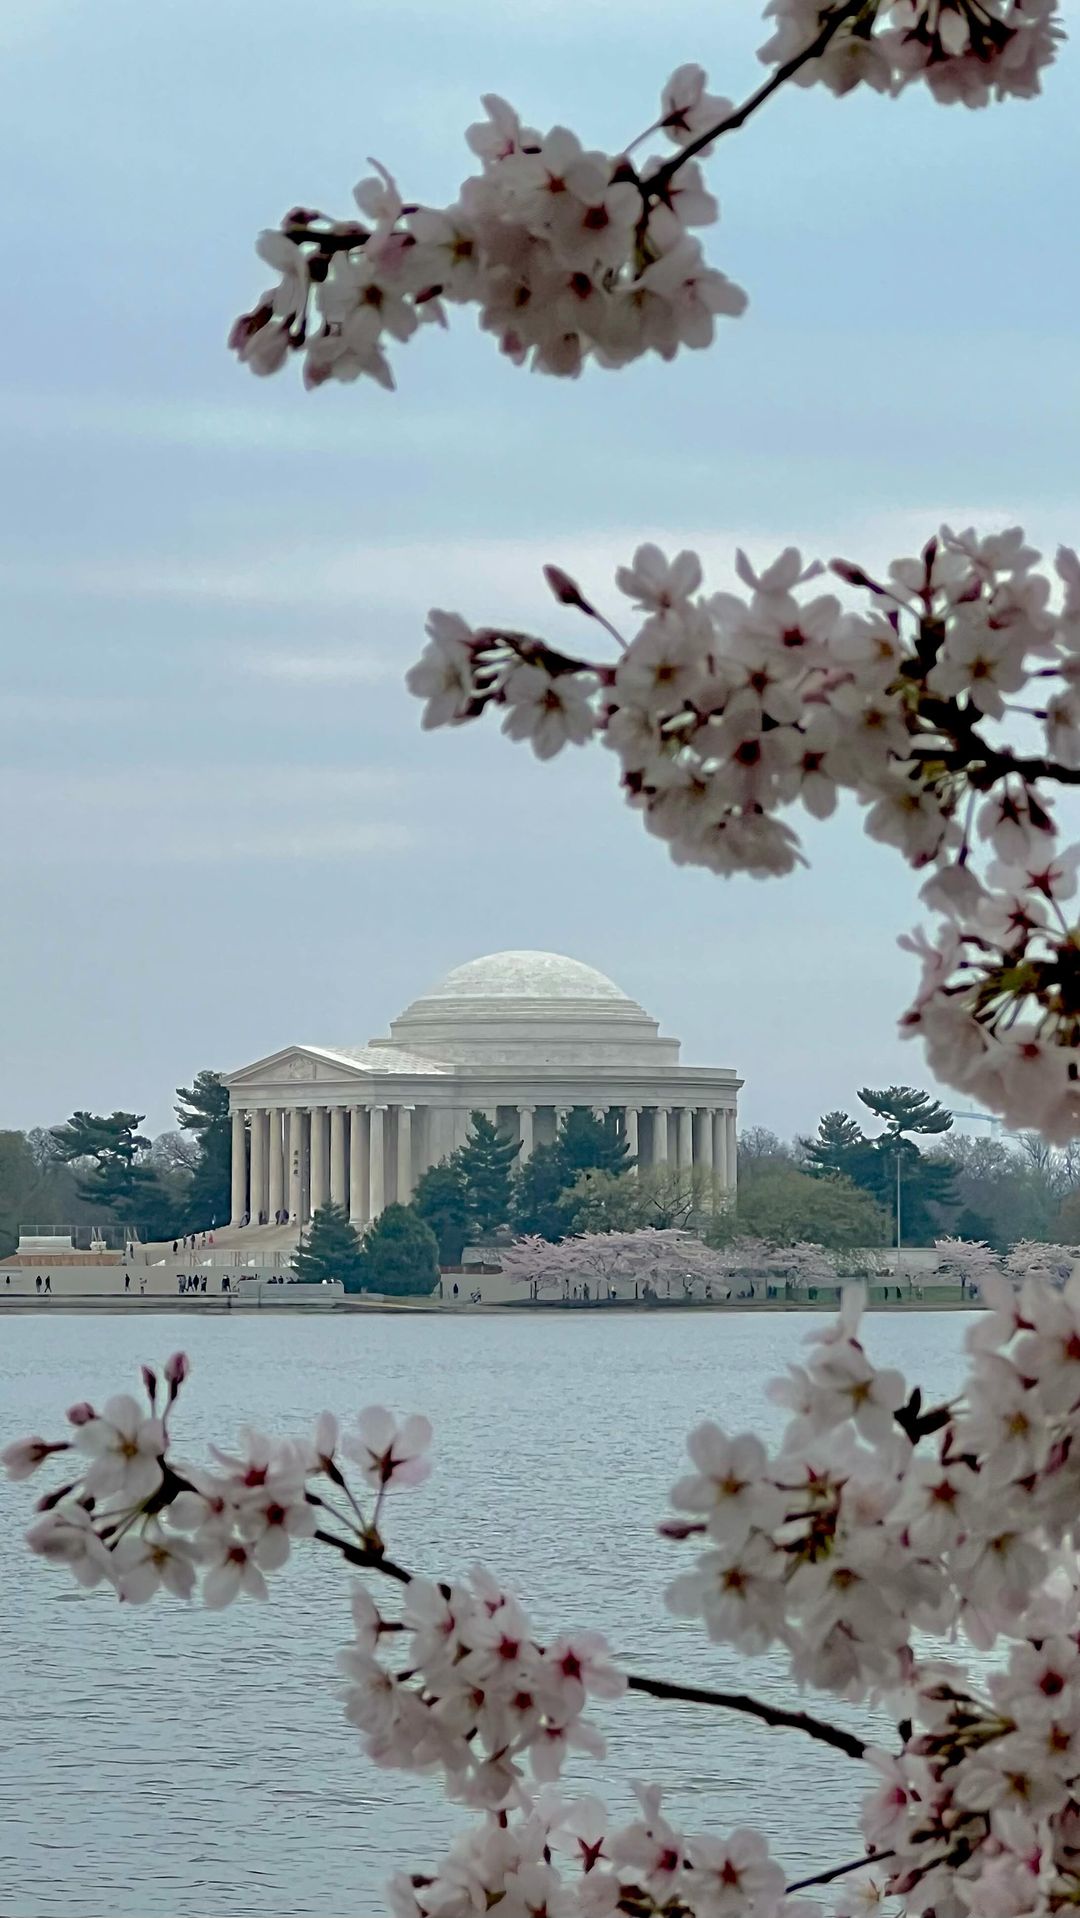 Washington, DC Monuments and Culinary Delights